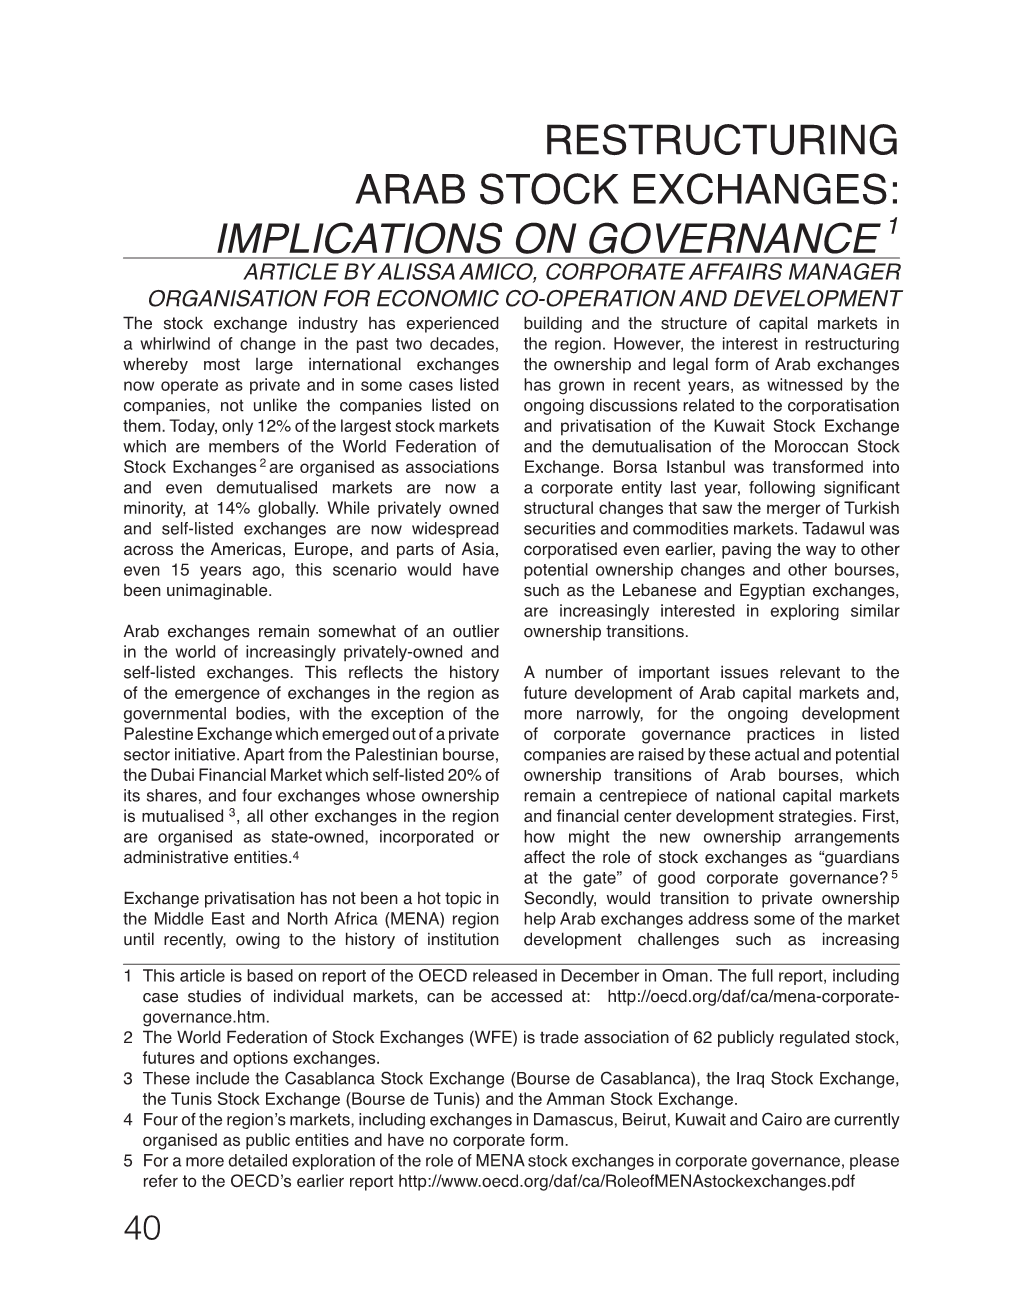 Restructuring Arab Stock Exchanges